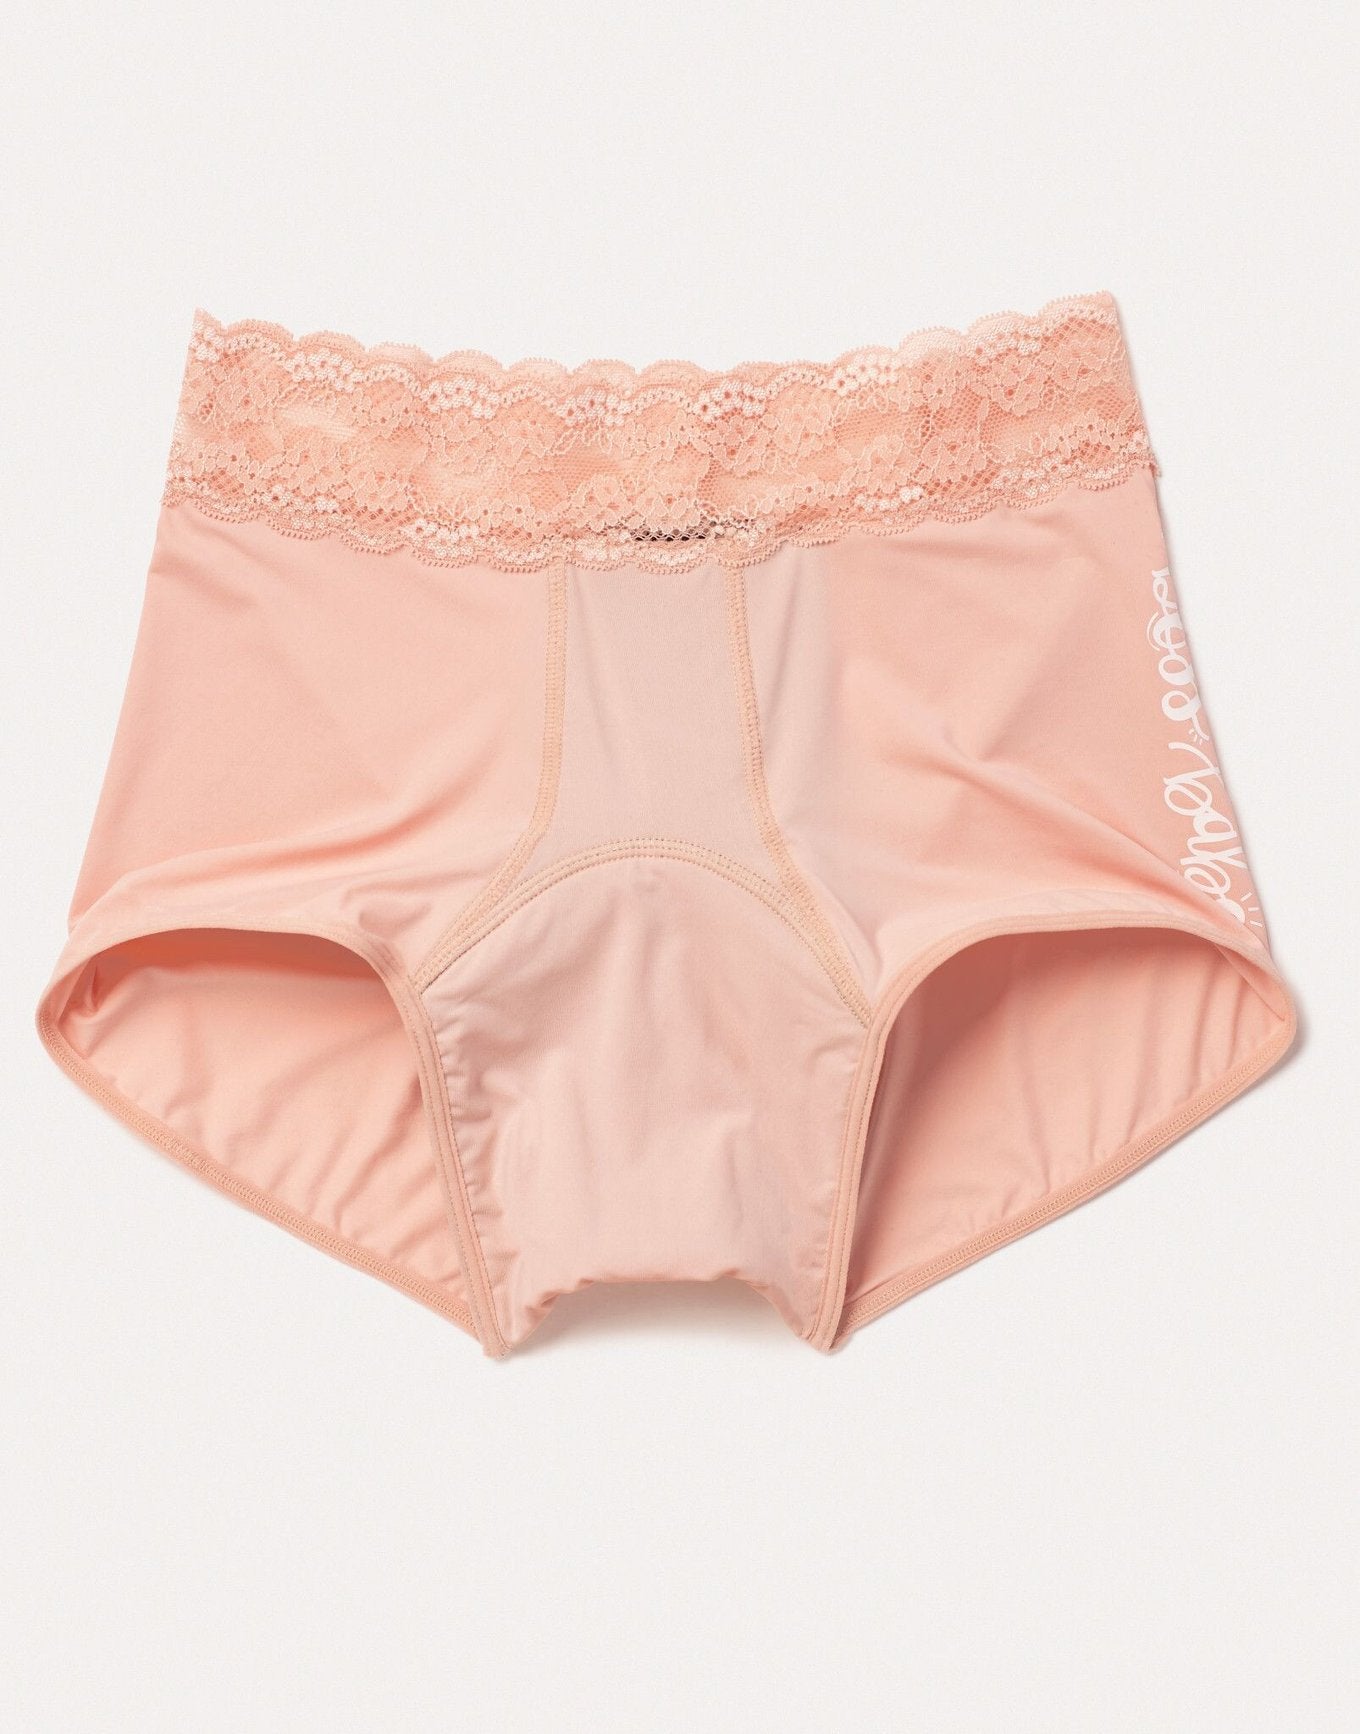 Joyja Emily period-proof panty in color Boss Babe and shape shortie